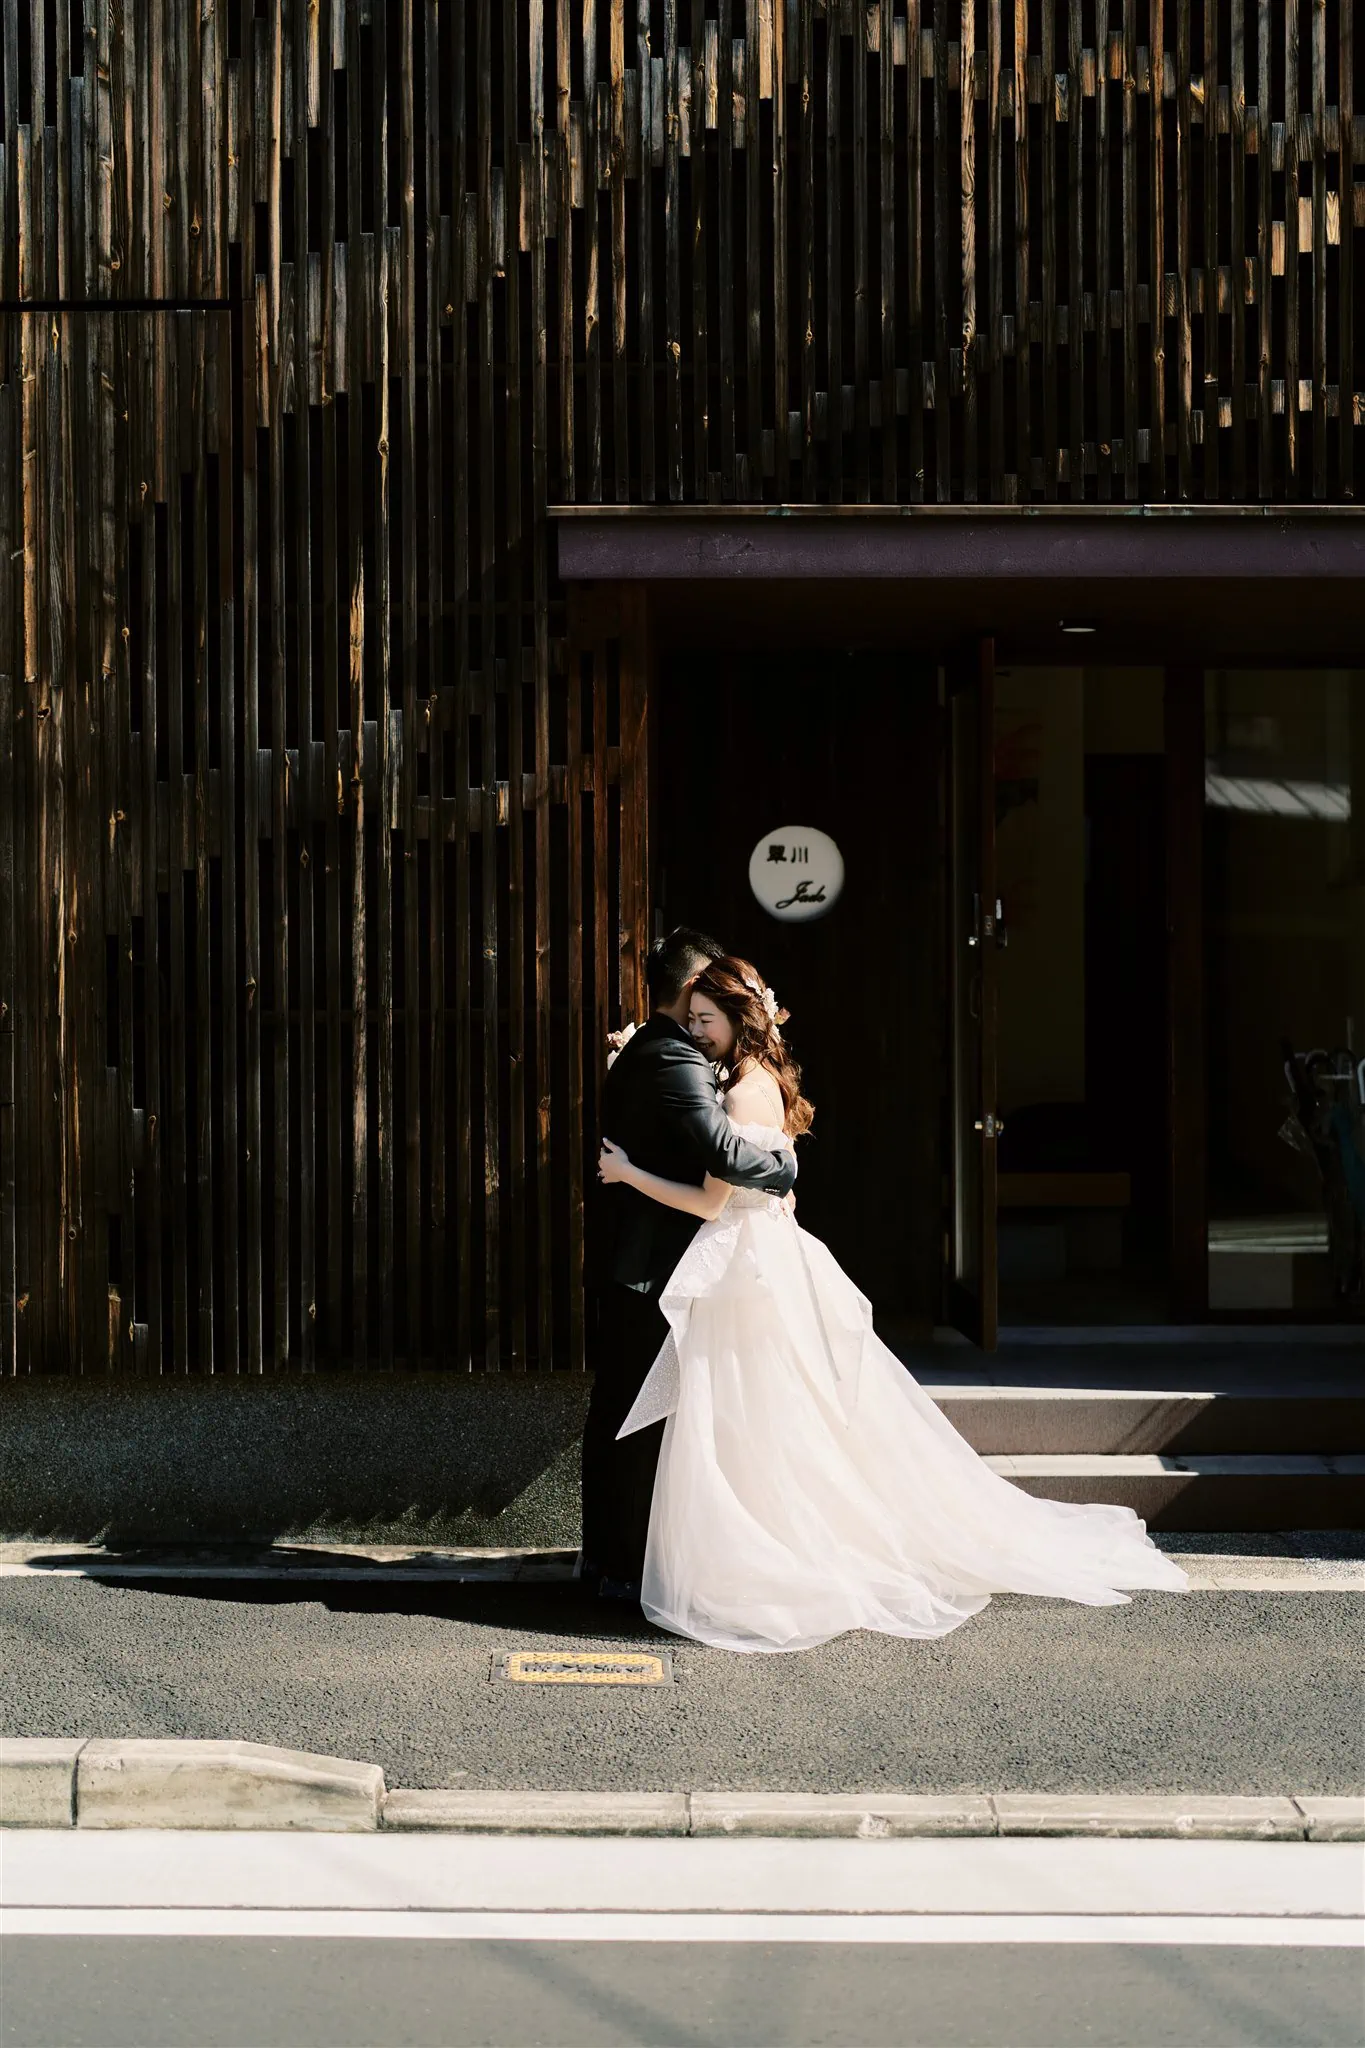 Kyoto Tokyo Japan Elopement Wedding Photographer, Planner & Videographer | A Japan elopement photographer captures an intimate moment between a bride and groom as they hug in front of a wooden building.